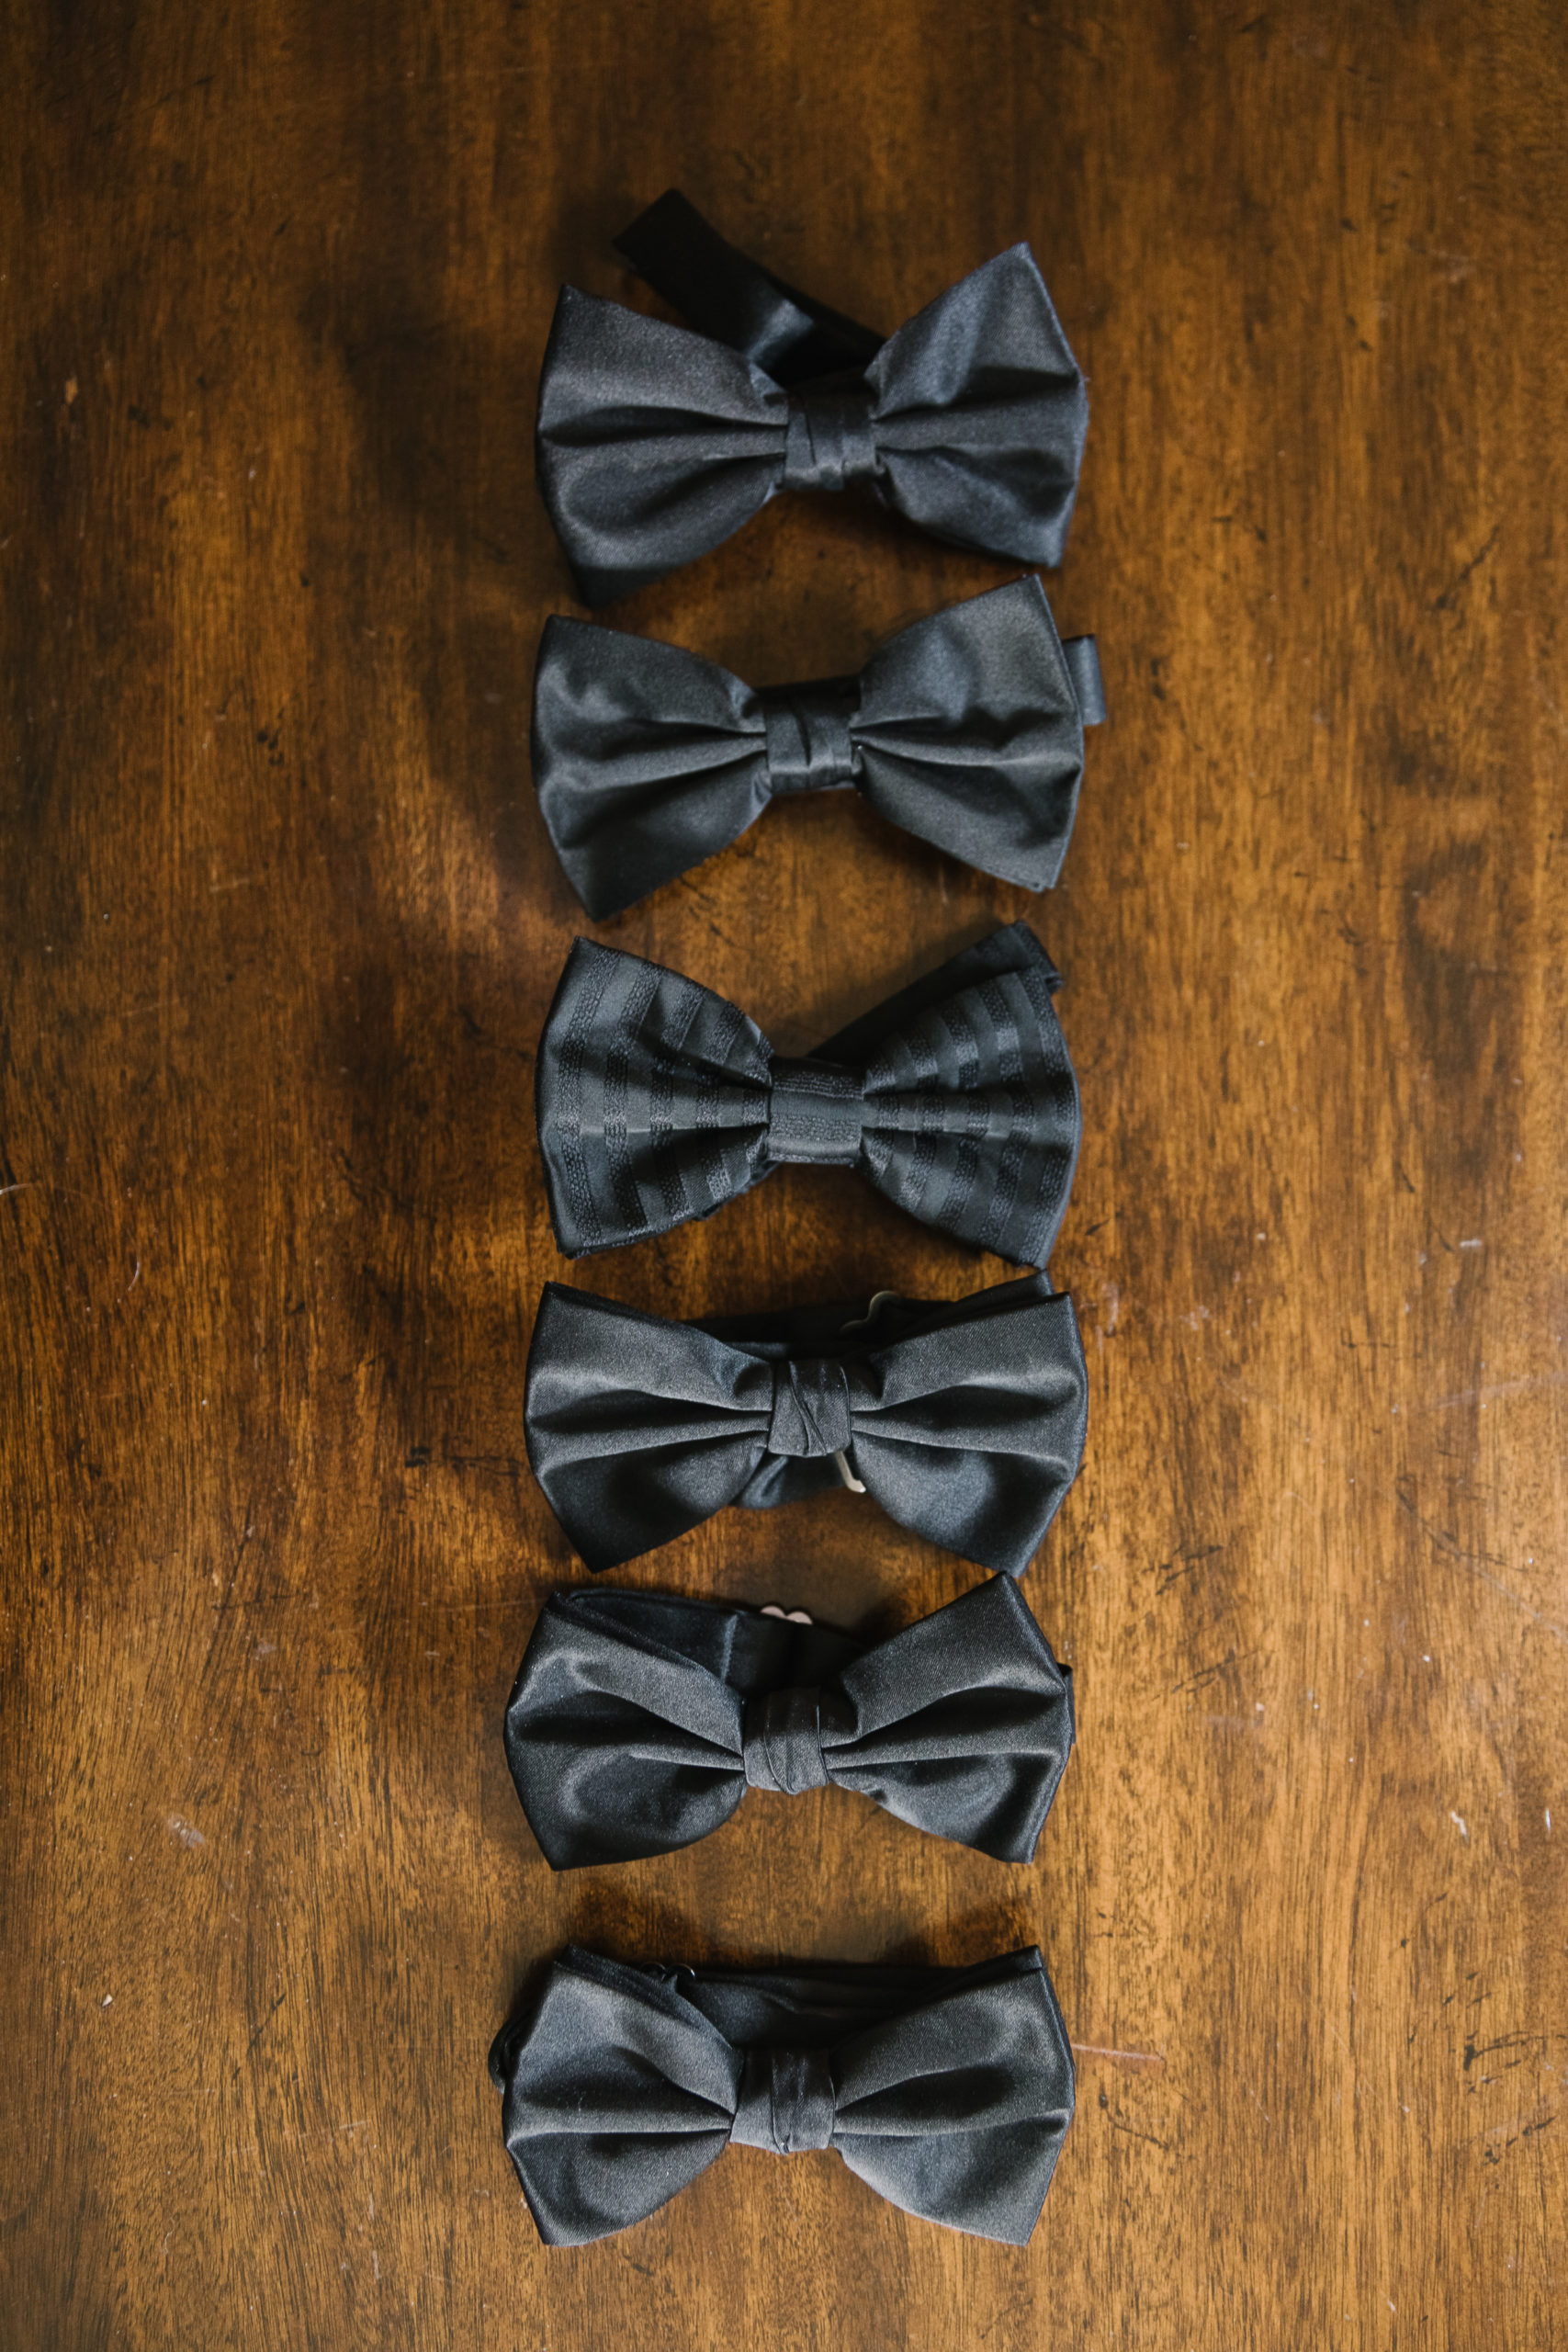 black bowties in a line